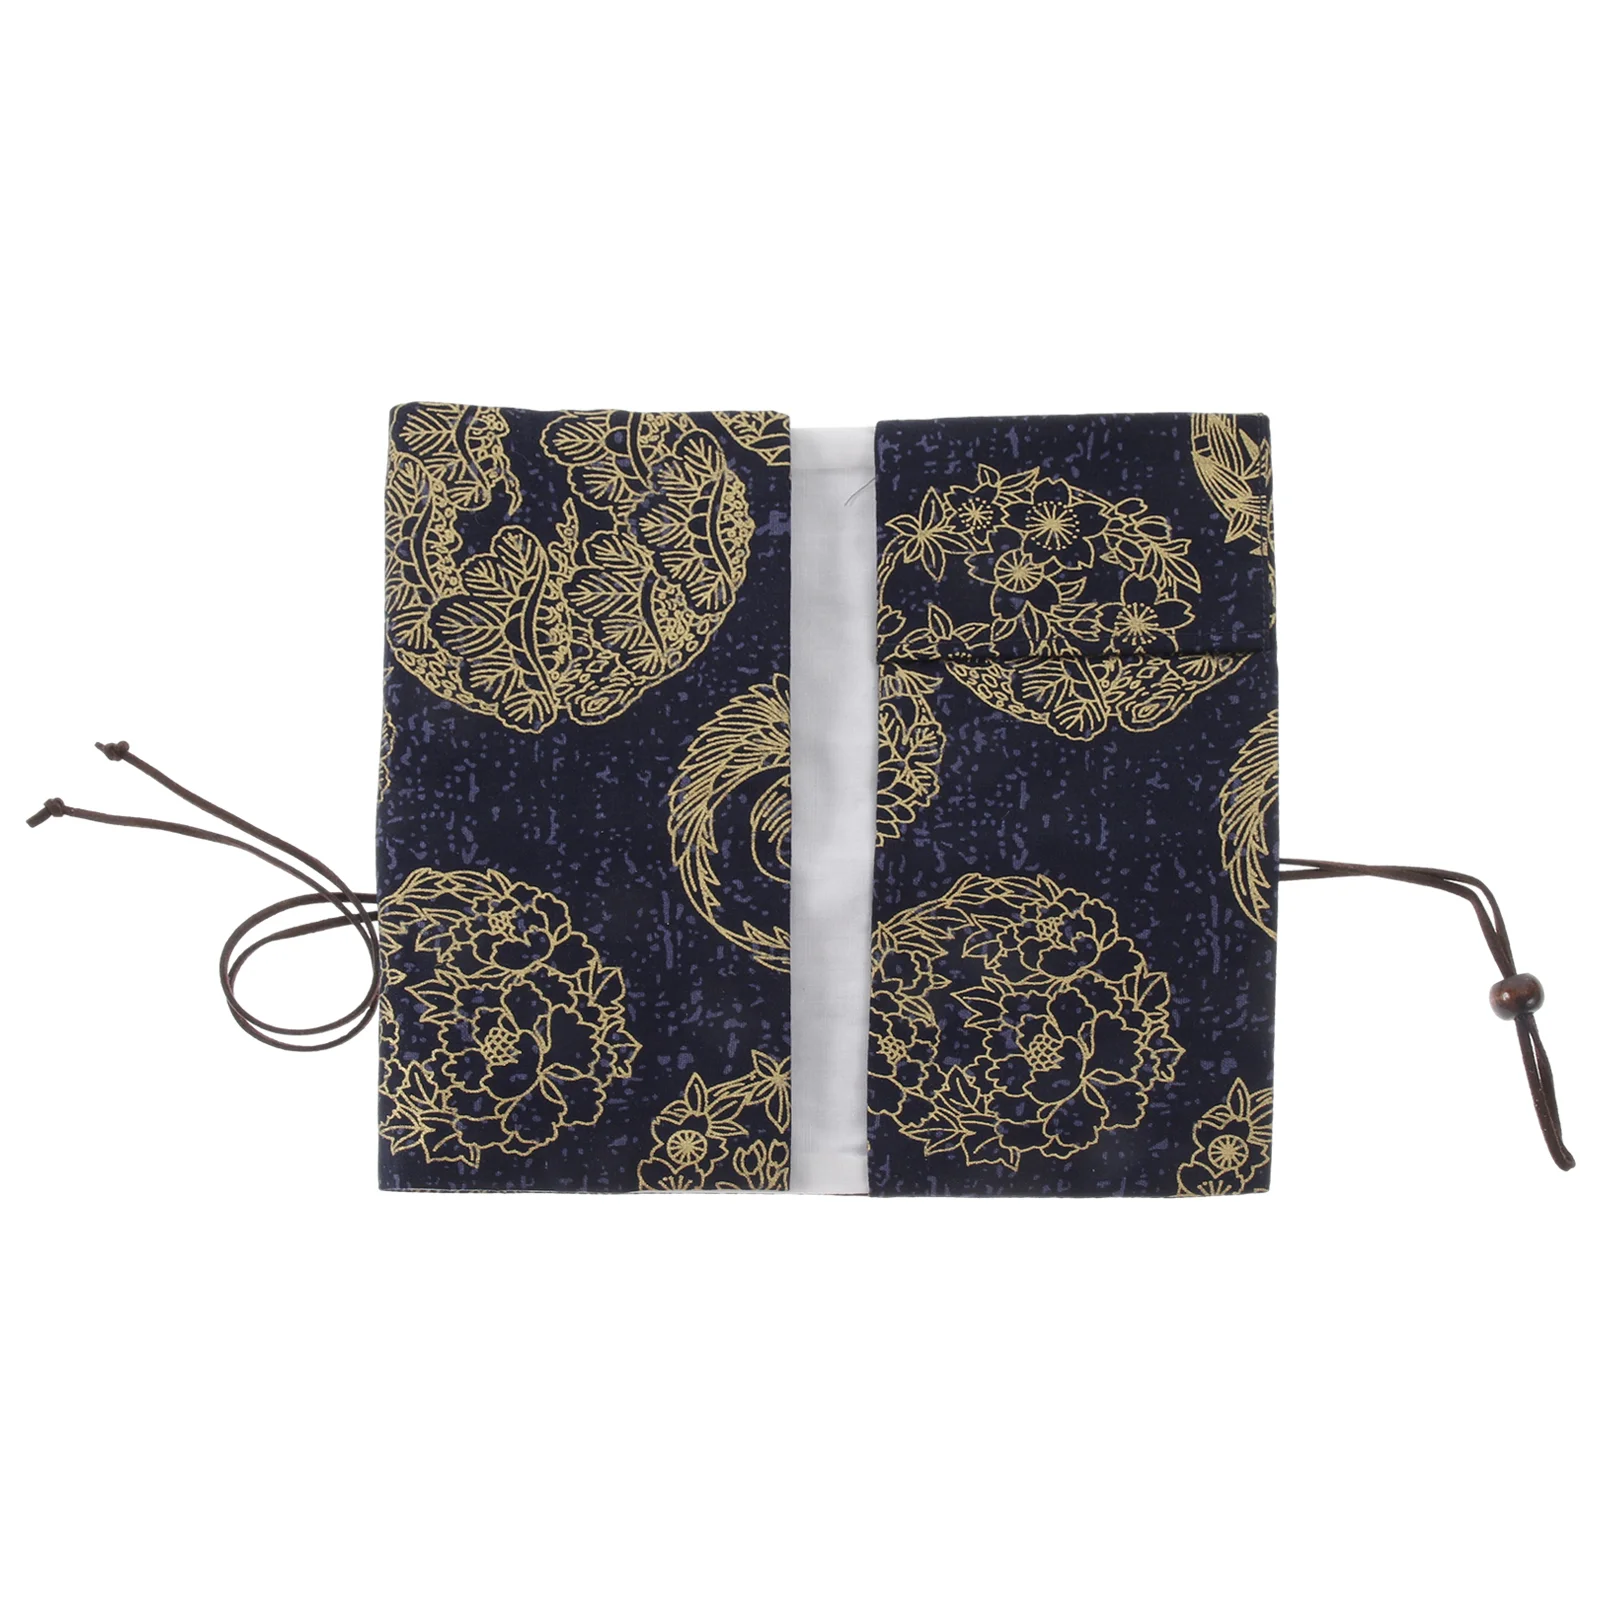 

Ink Blue Dyed Patchwork Fabric Book Cover Protector Decorative Adjustable for Sleeve Student